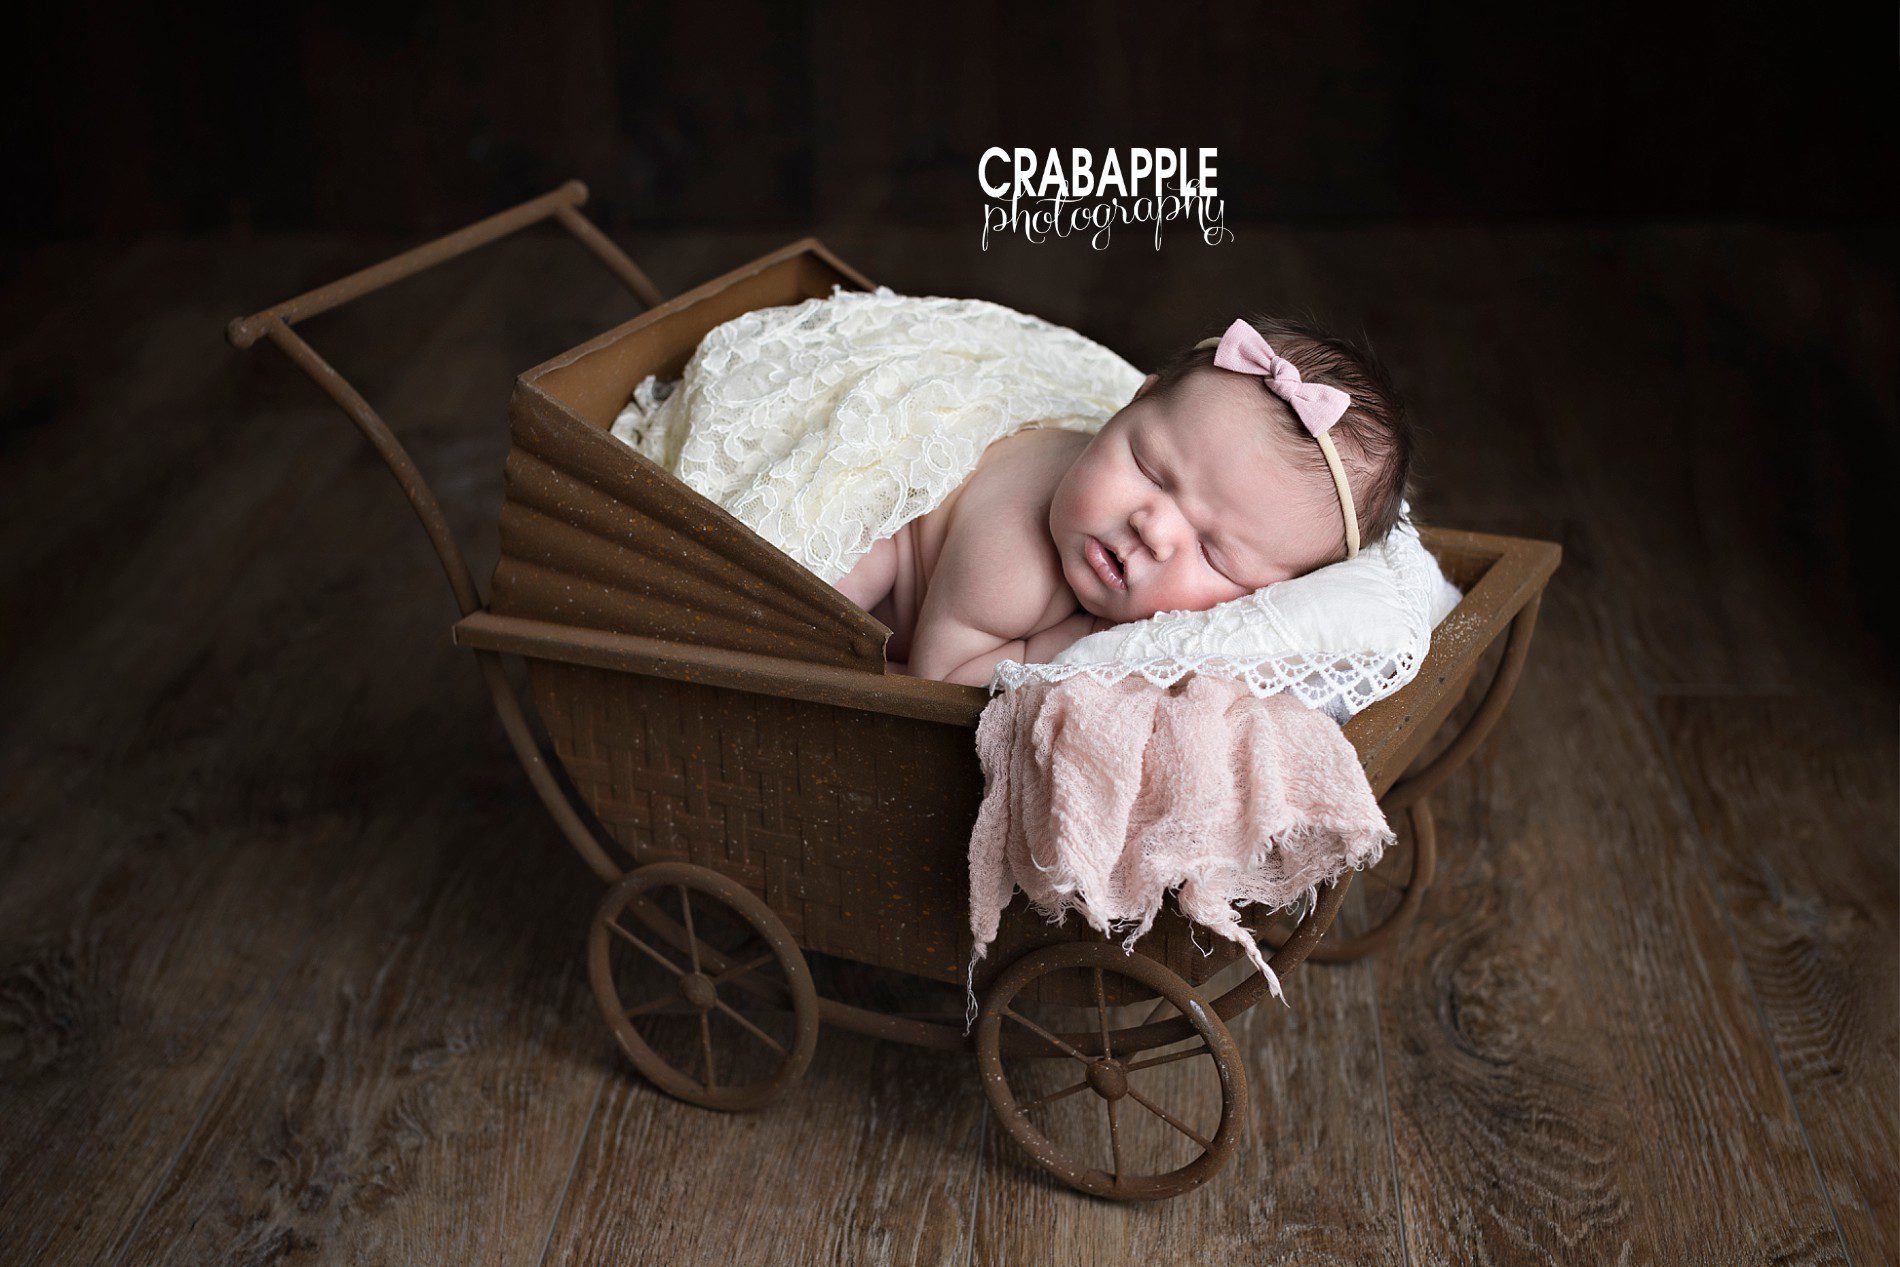 vintage stroller buggy pram for newborn portraits ideas for posing and props